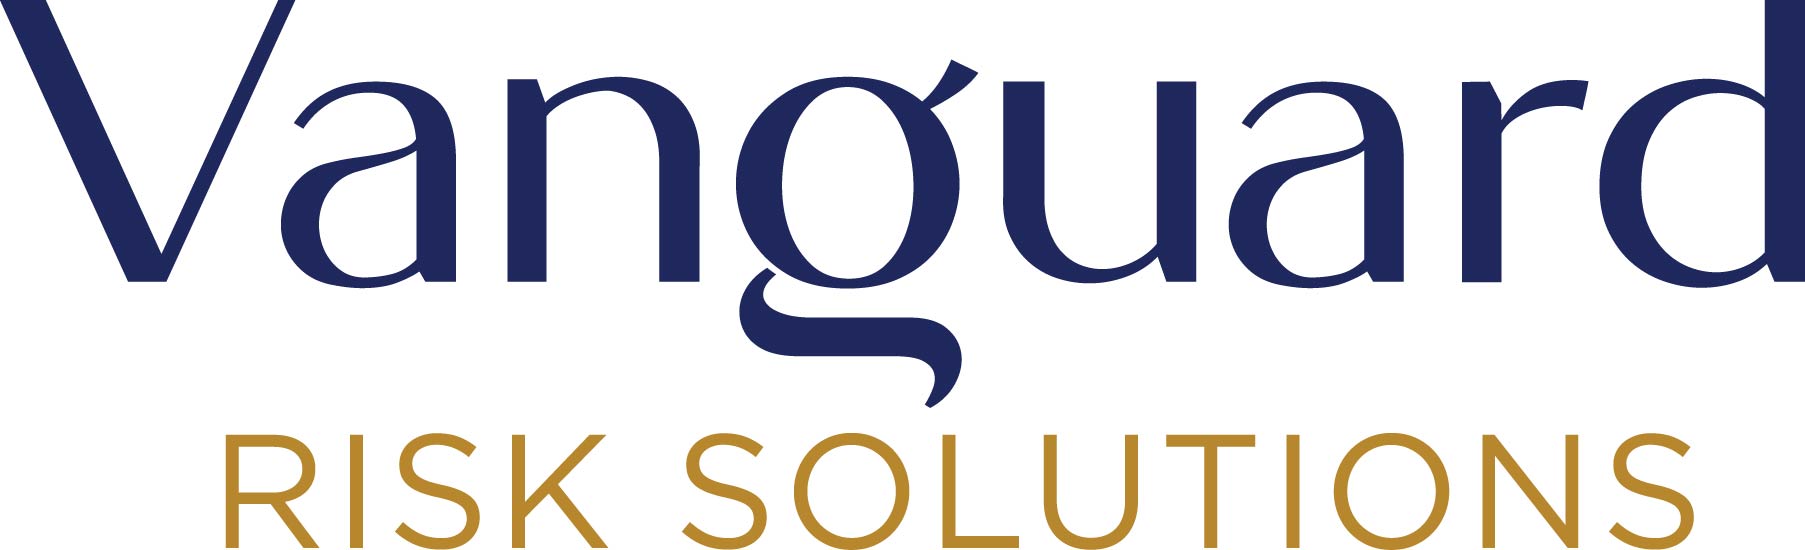 Vanguard Risk Solutions Limited